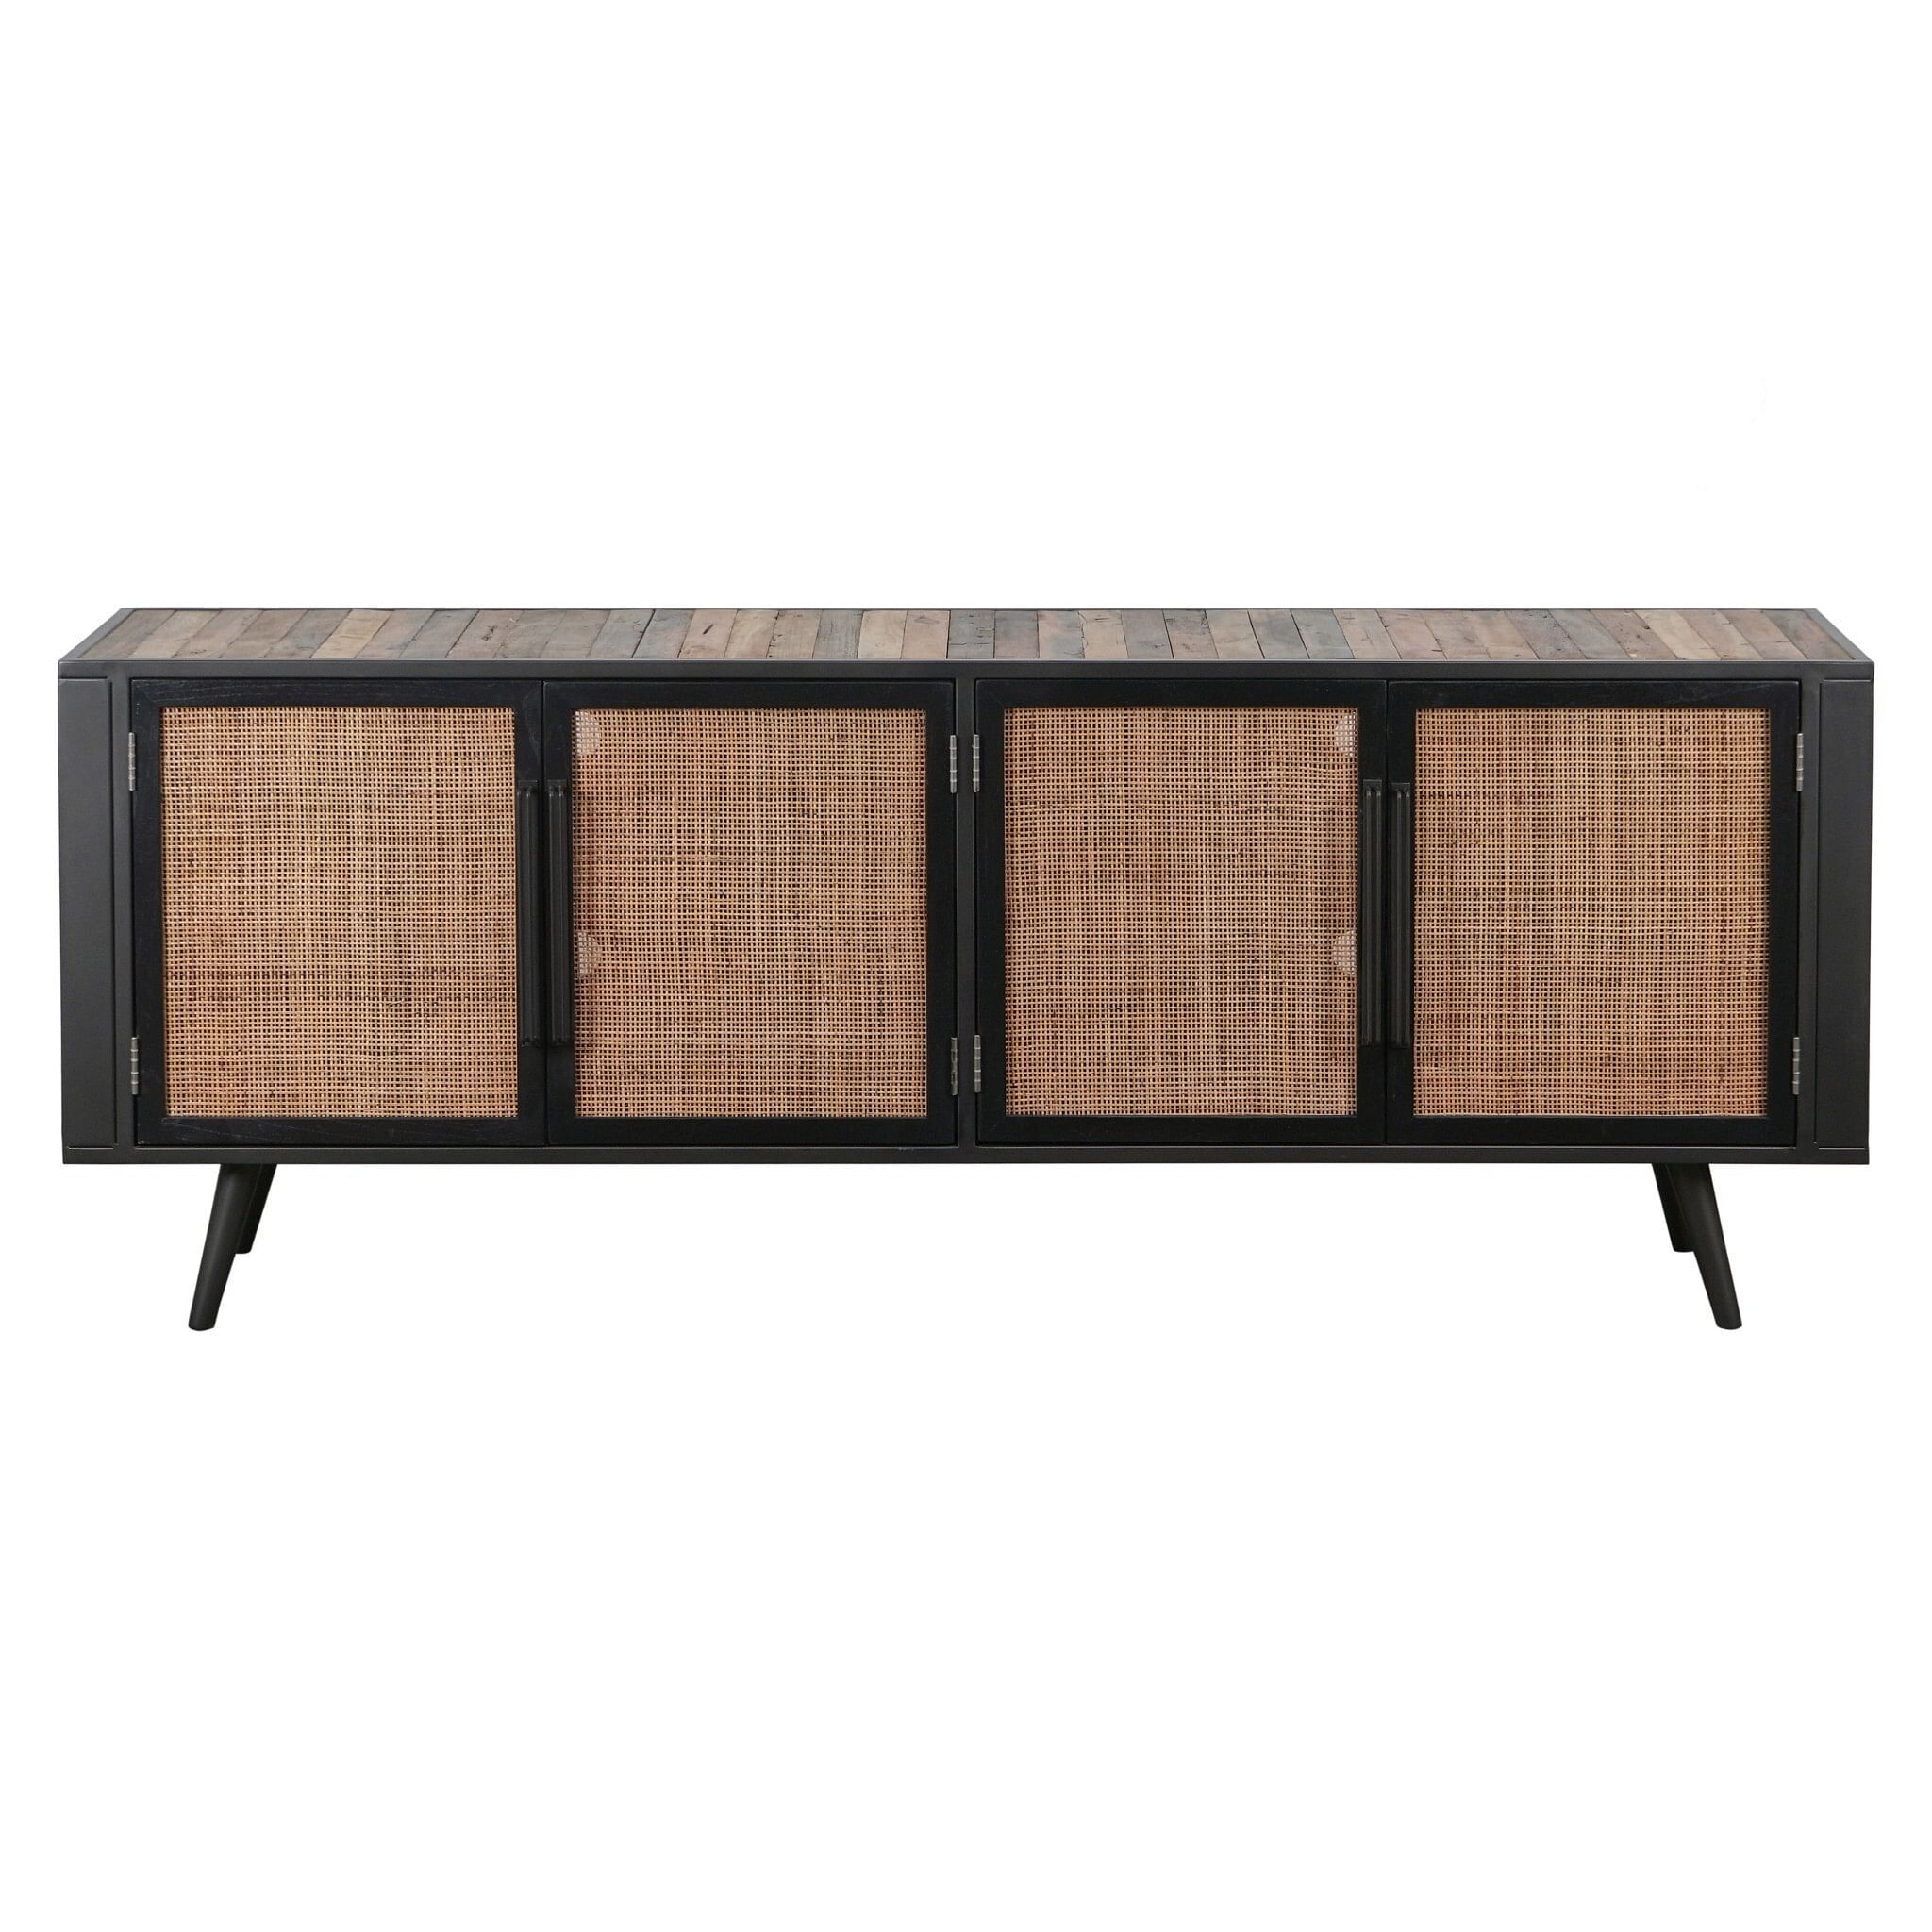 Natural Boat Wood Rattan Tv Dresser 4 Doors Within Farmhouse Rattan Tv Stands (View 6 of 20)